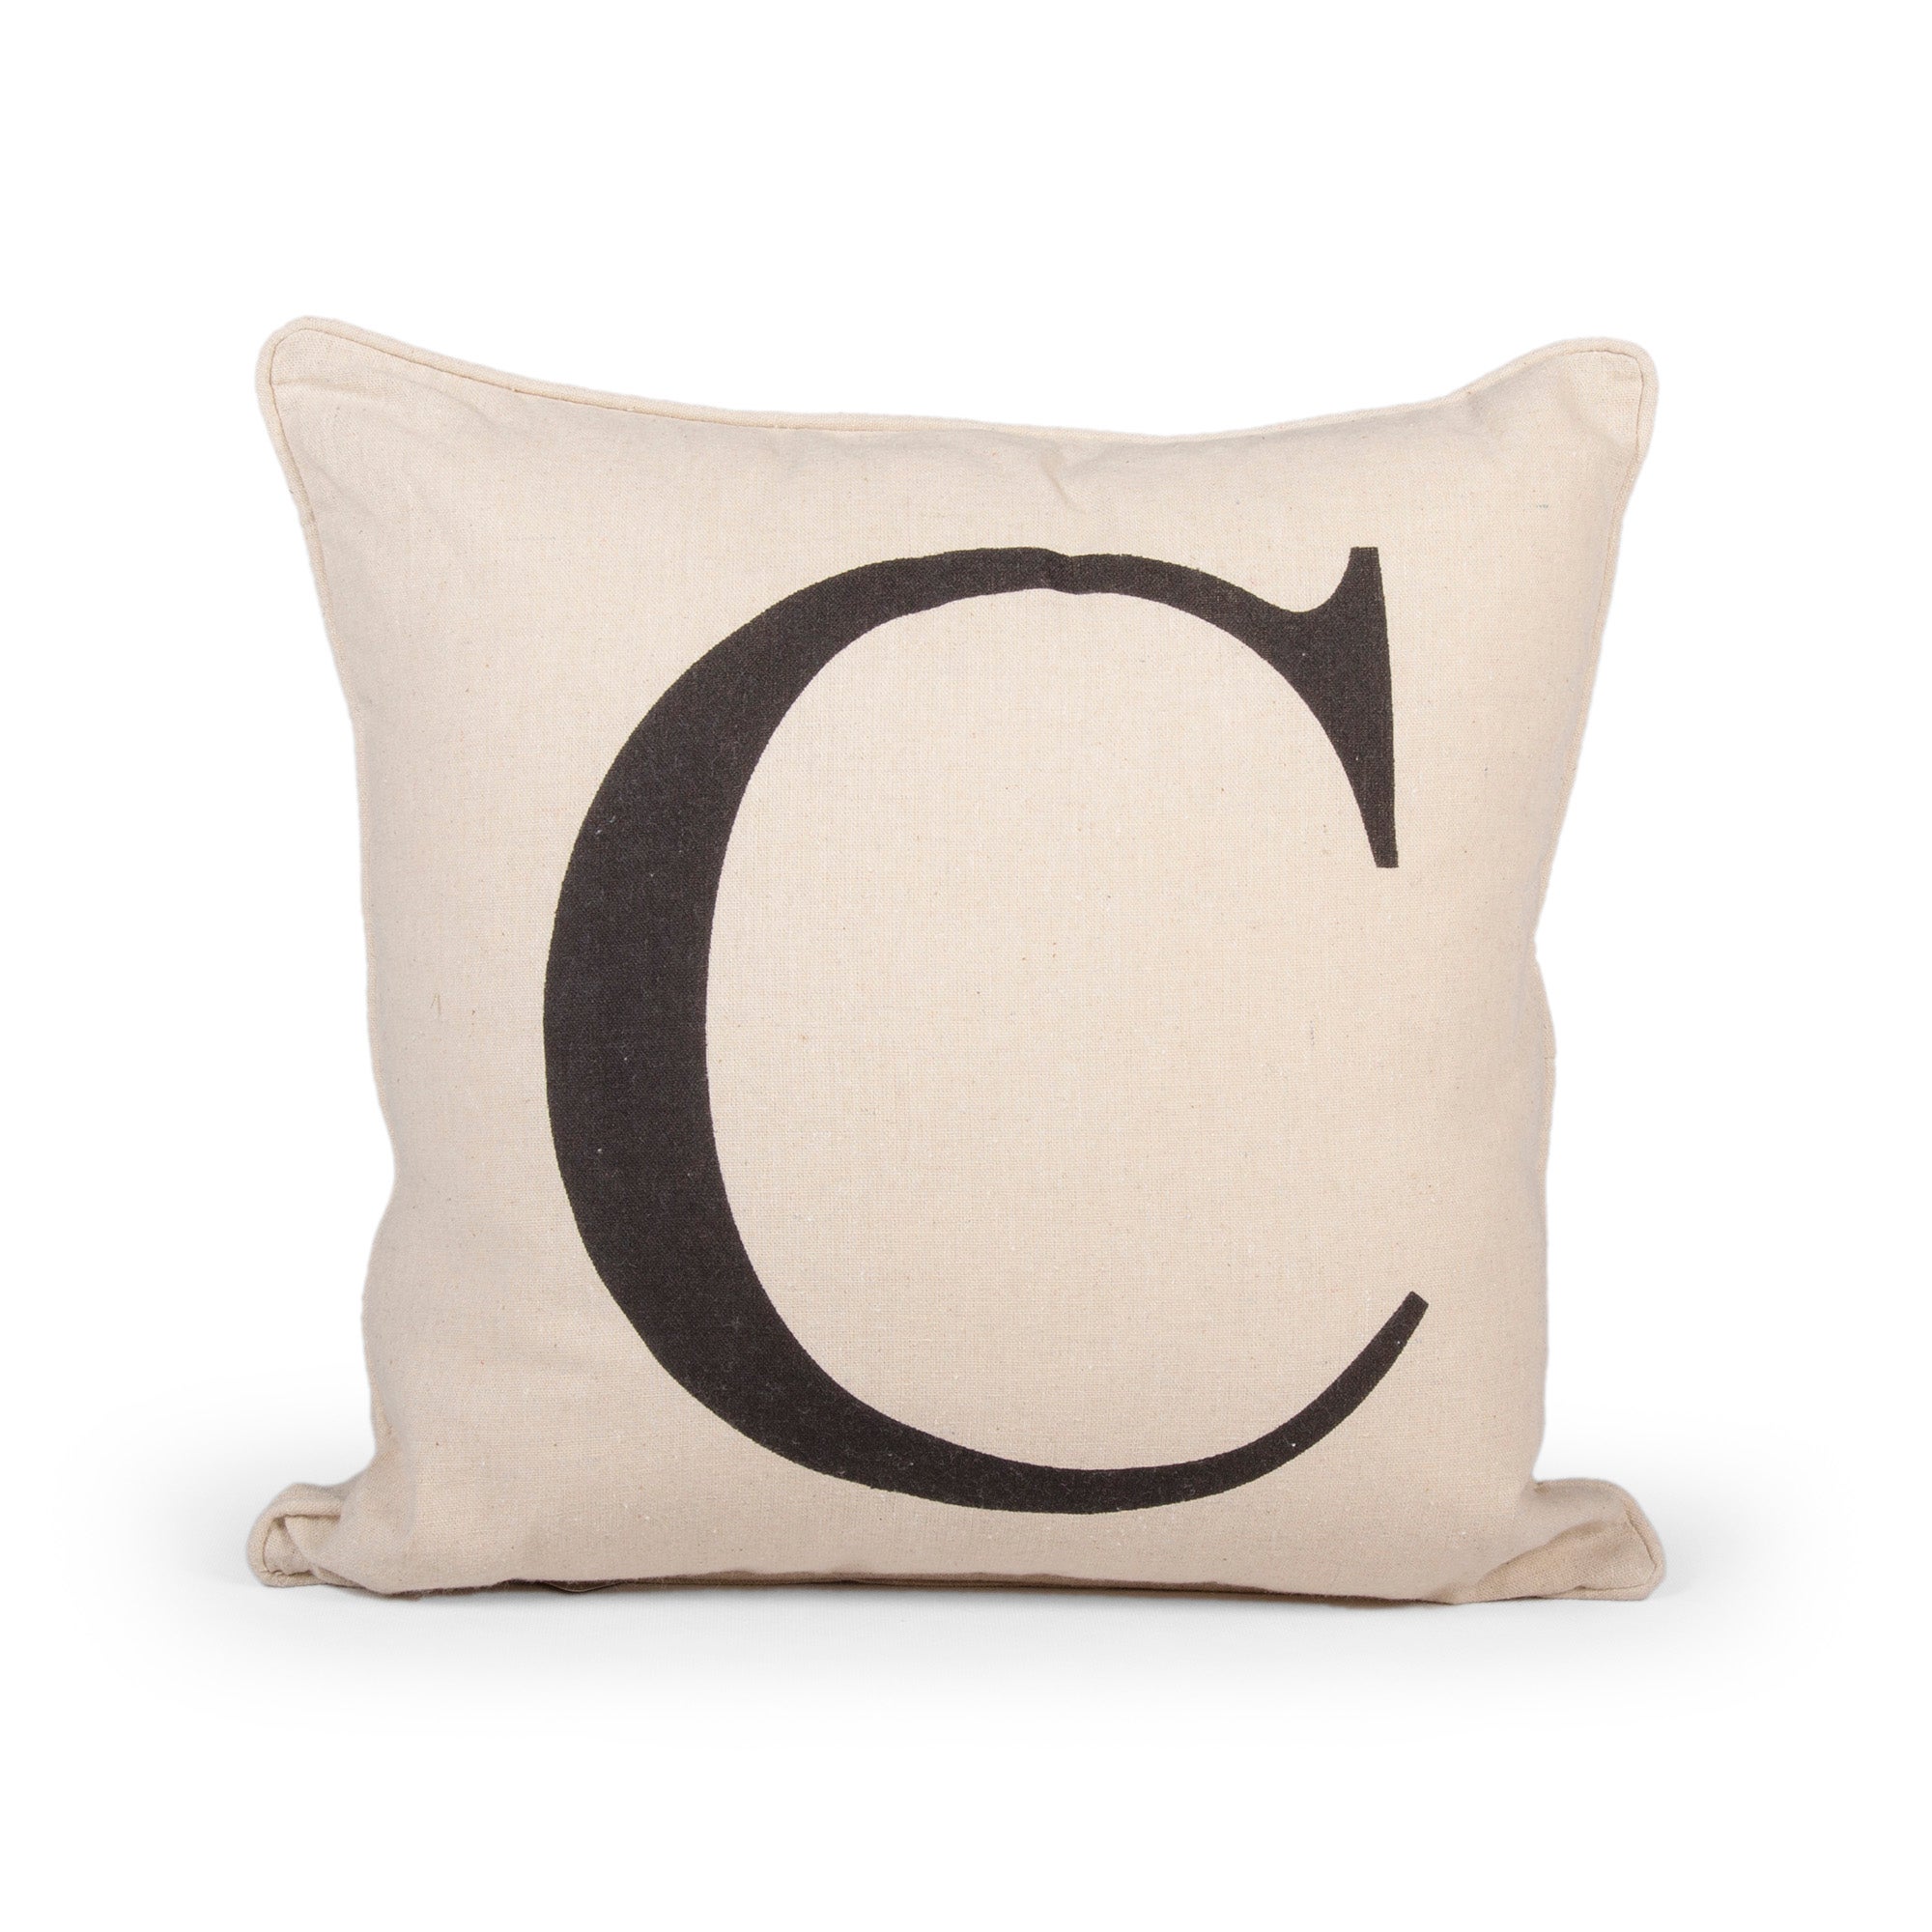 Filled Cushions | Small & Large Filled Cushions | Dunelm